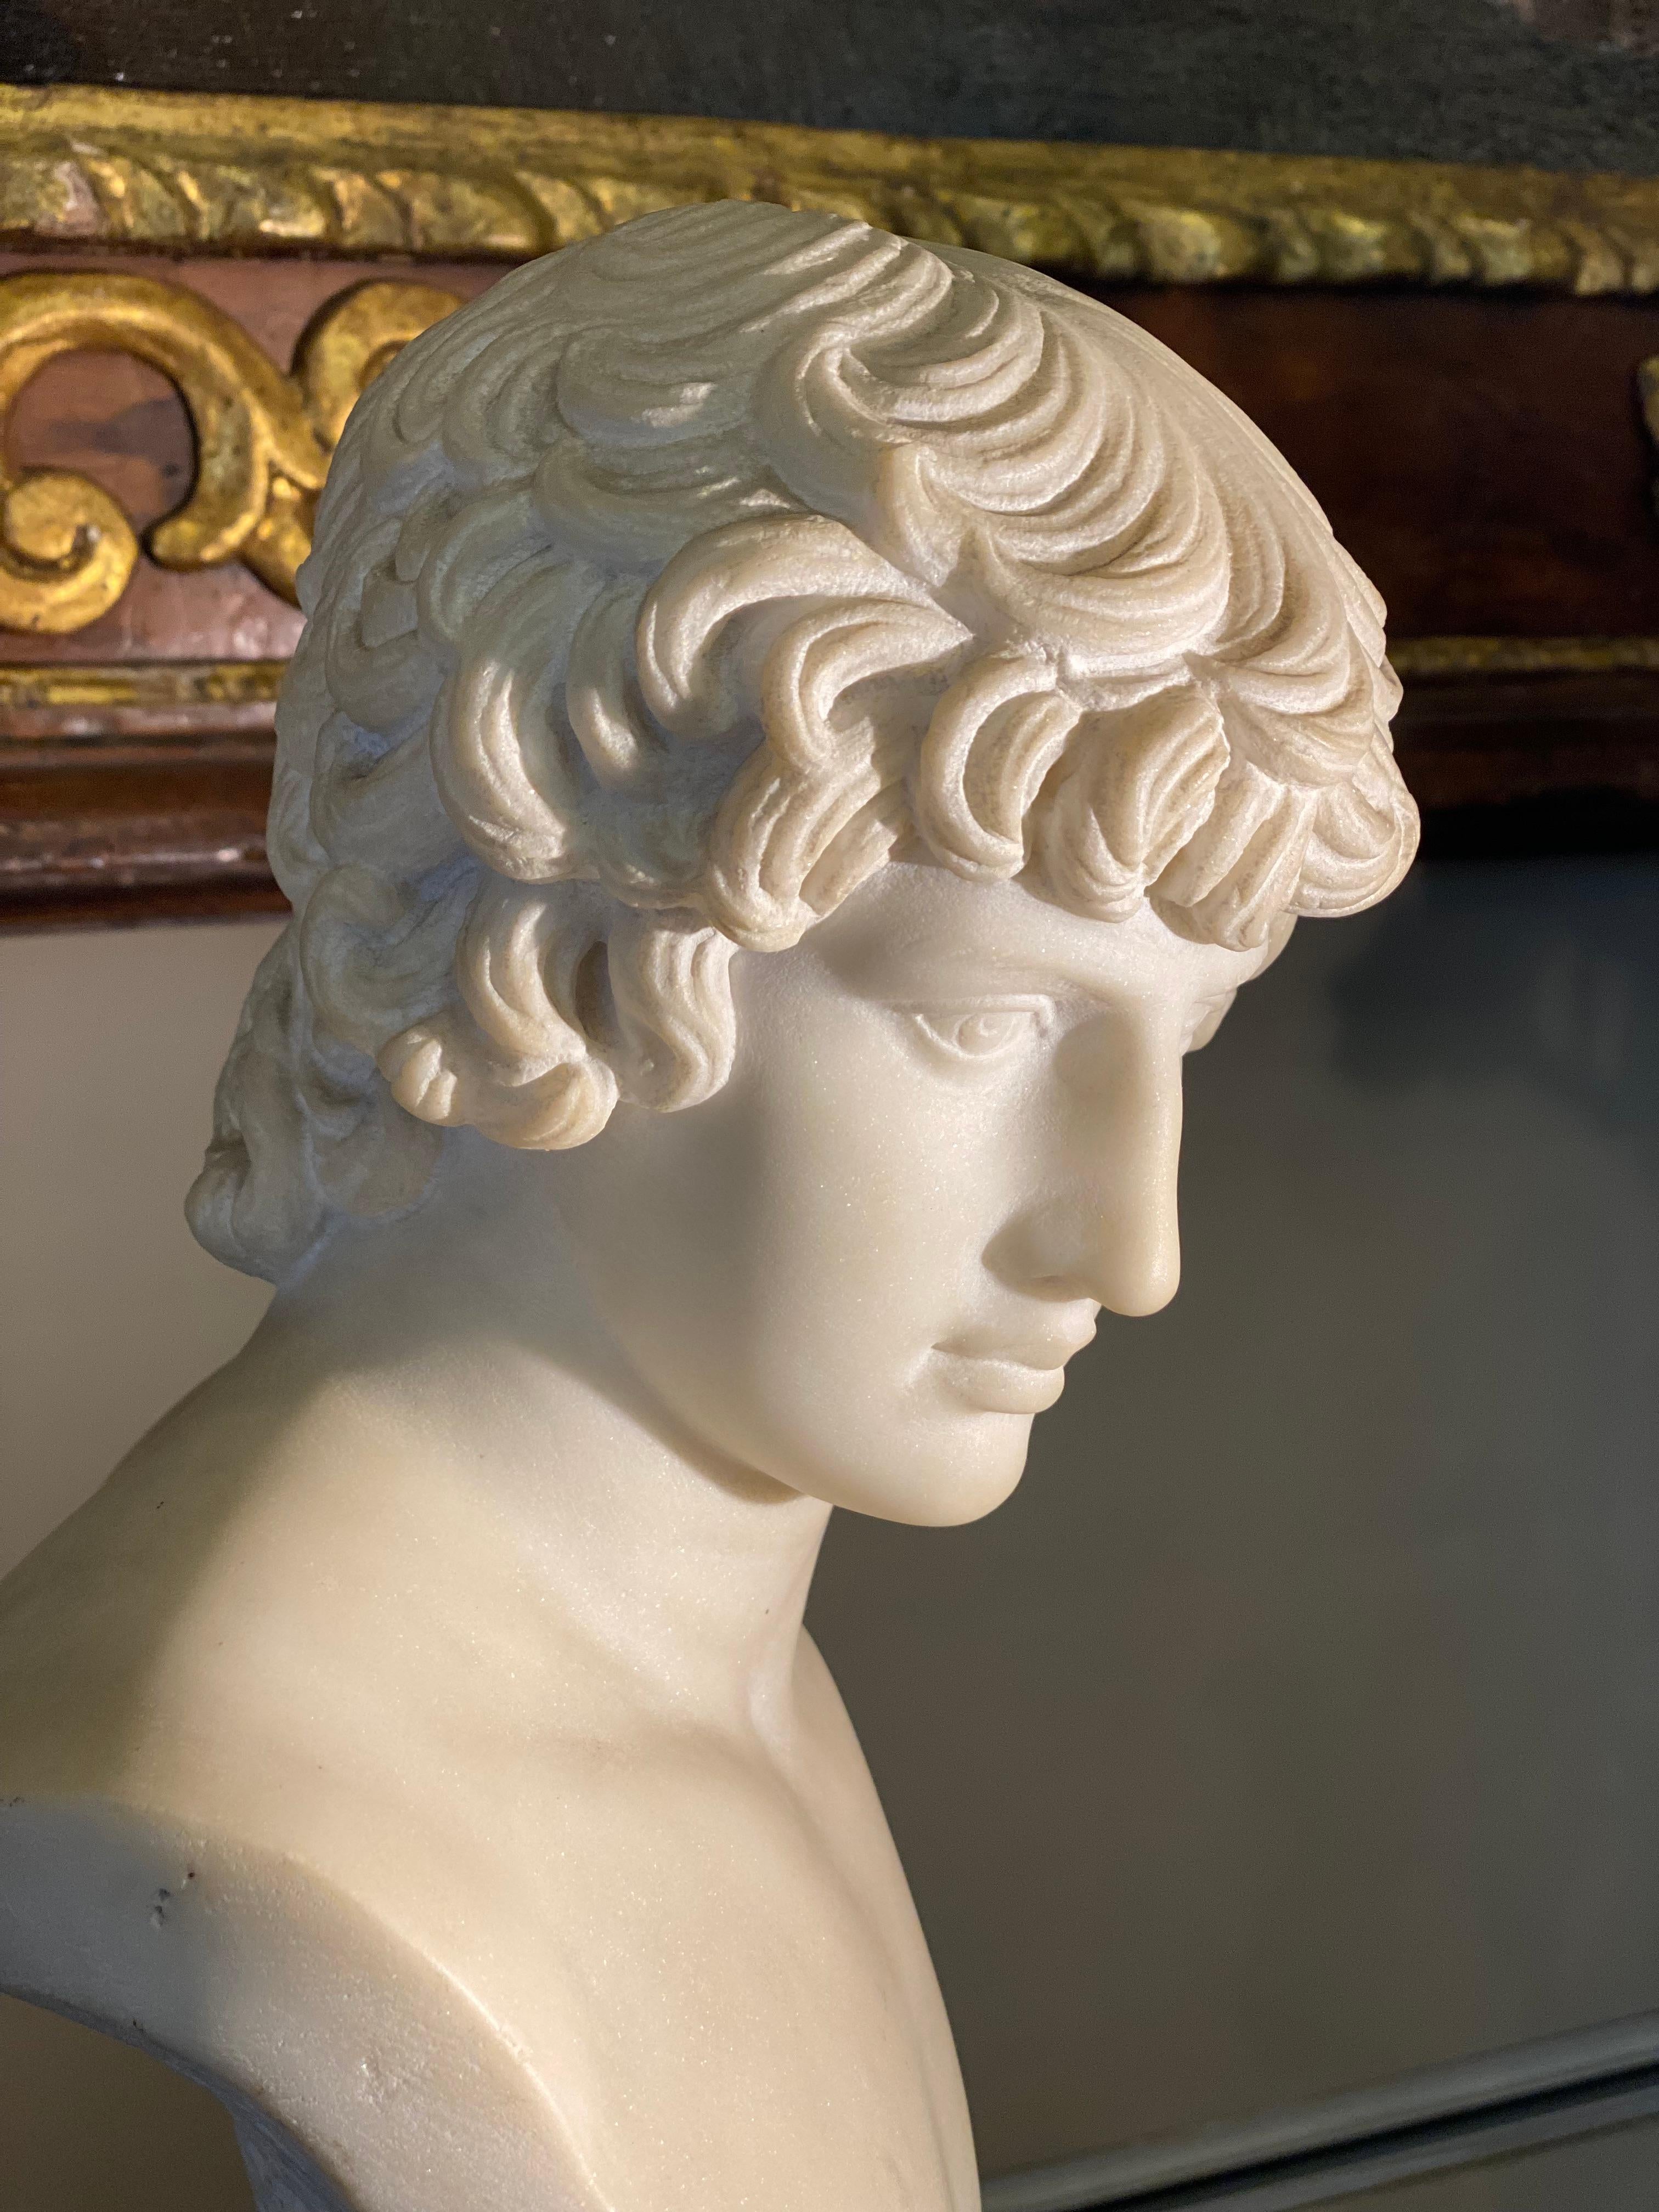 
Amazing early 19th century Italian finely carved Carrara marble bust of Antinoo , after the Antique .
Portrait of Antinous, a young  Bithinius favorite of the emperor Hadrian, who died at a young age in 130 AD. and then deified. The physiognomic